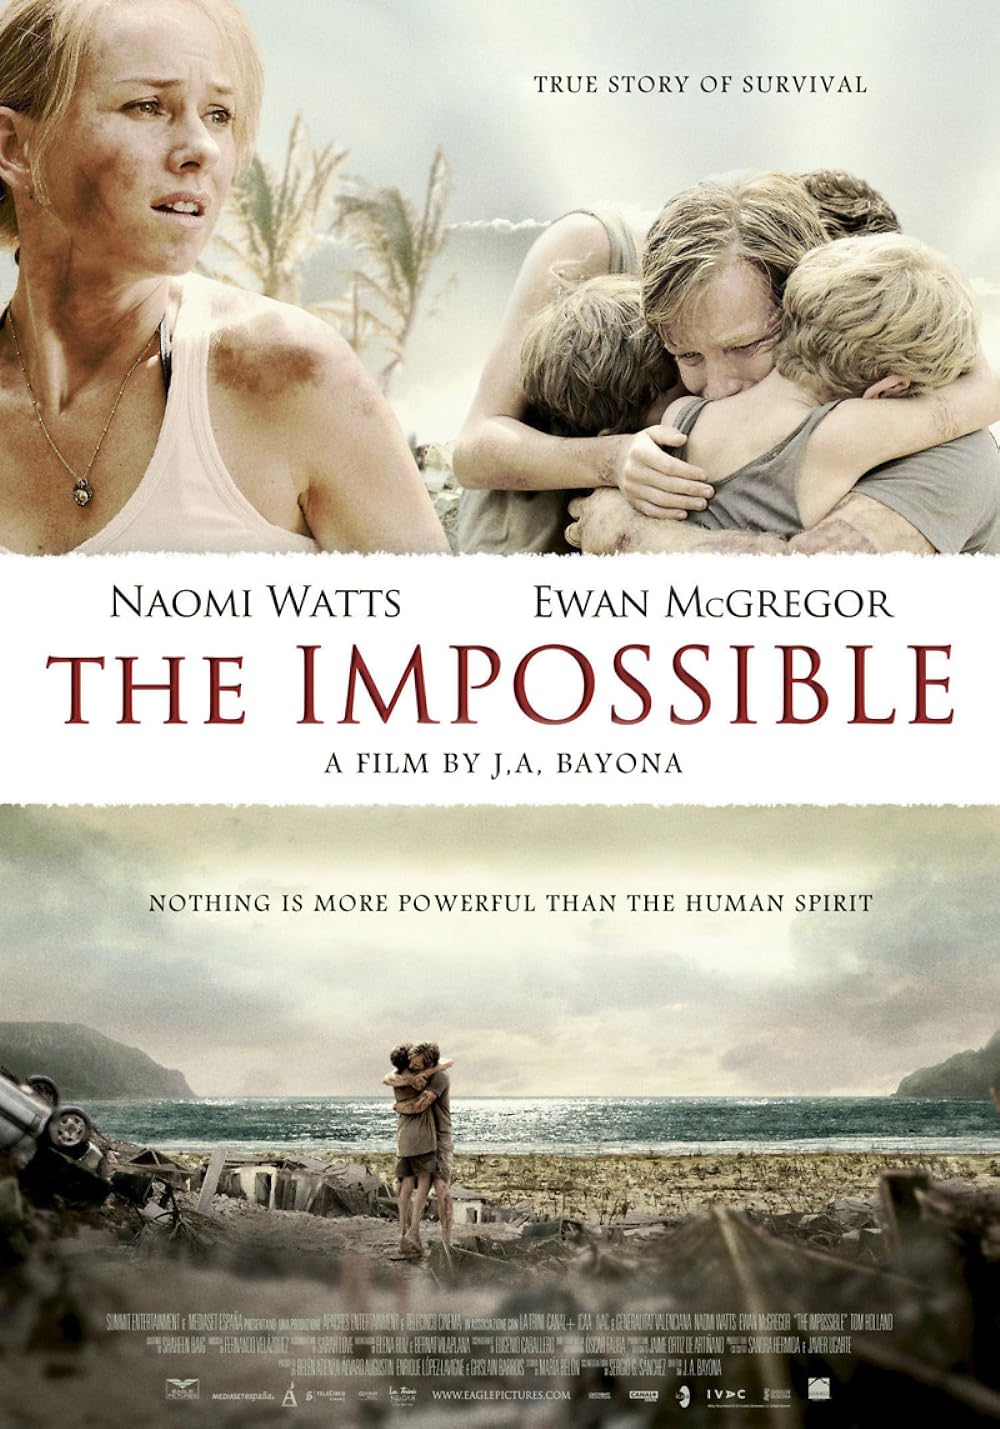 FULL MOVIE: The Impossible (2012)